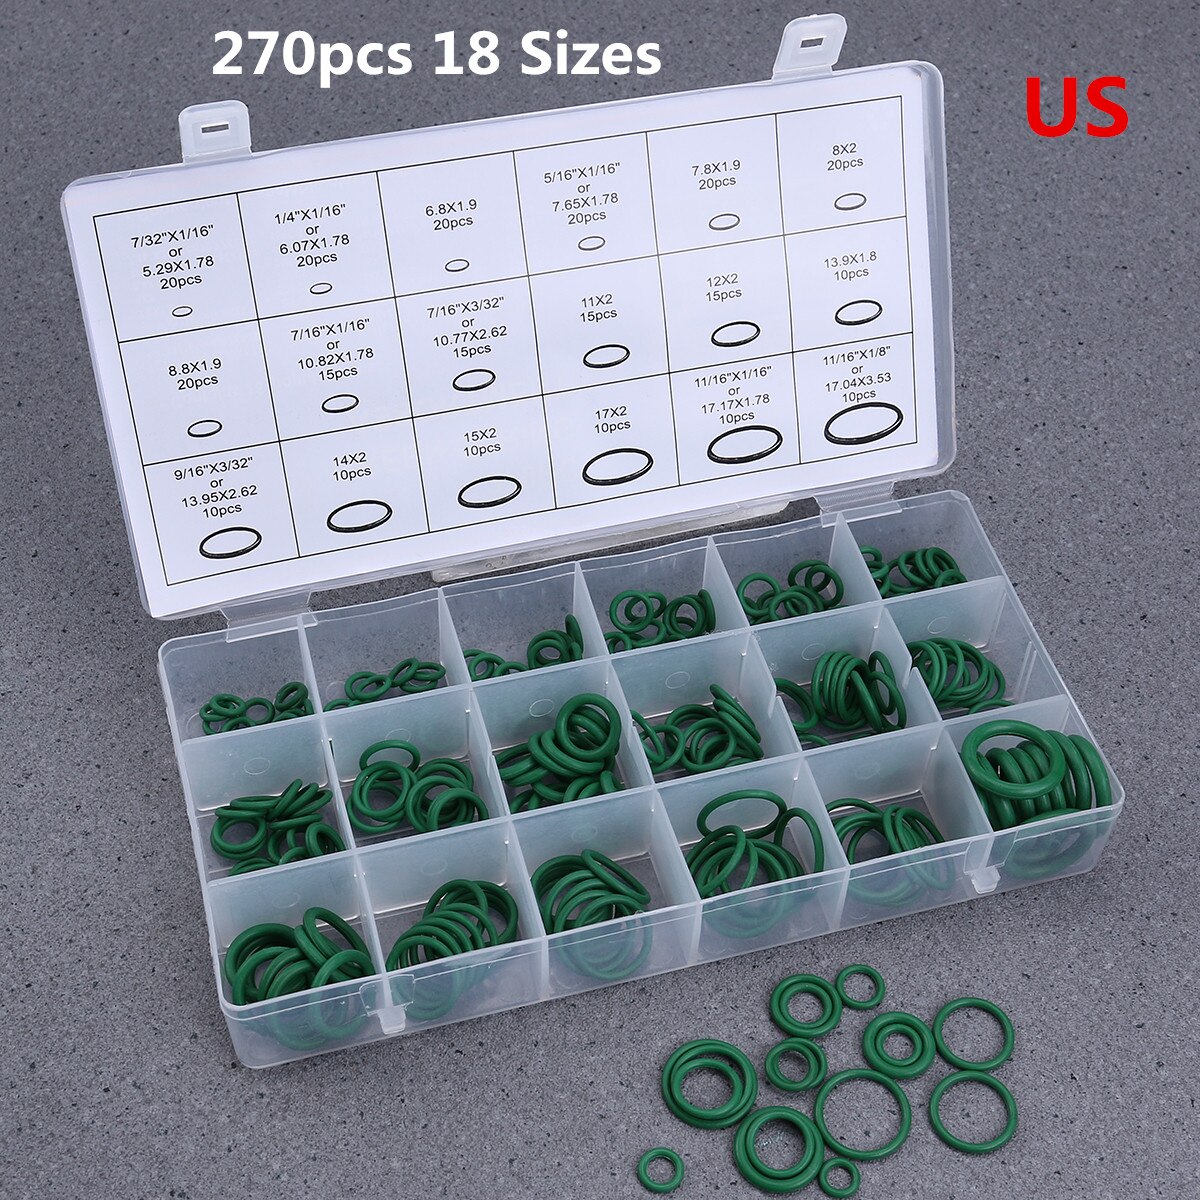 270pcs 18 Sizes O Ring Rubber Insulation Gasket Washer Seals Tool Car Air Conditioning Compressor Seals Car Repair tools A20: Green